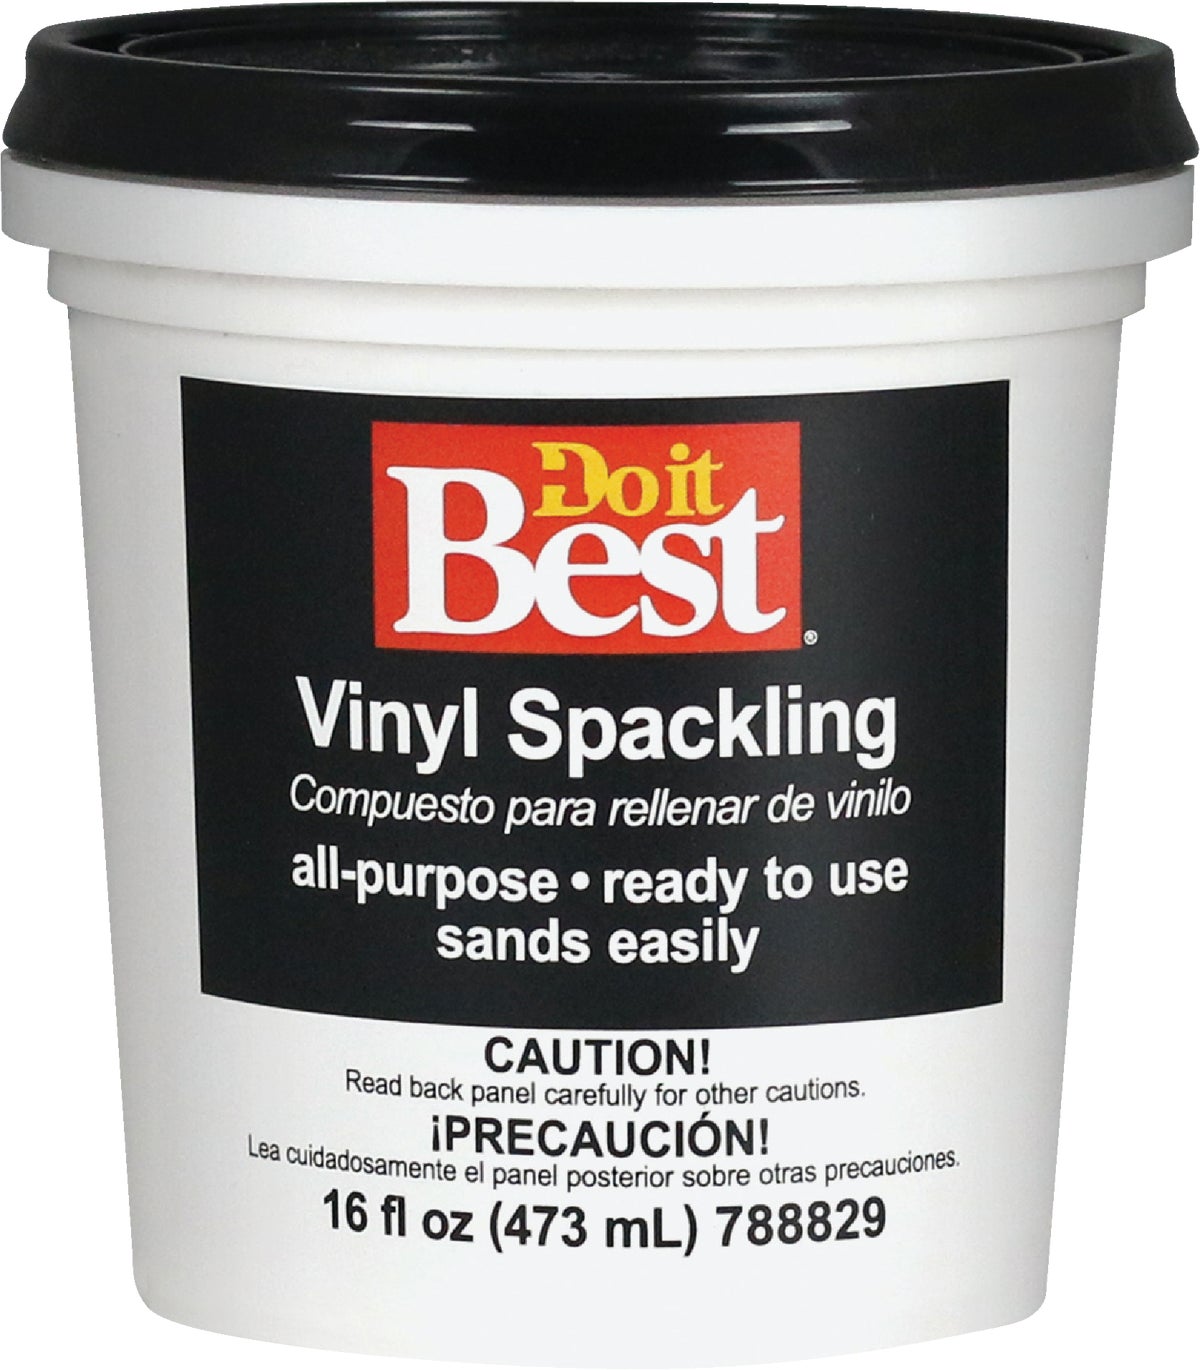 what is the best spackle for drywall